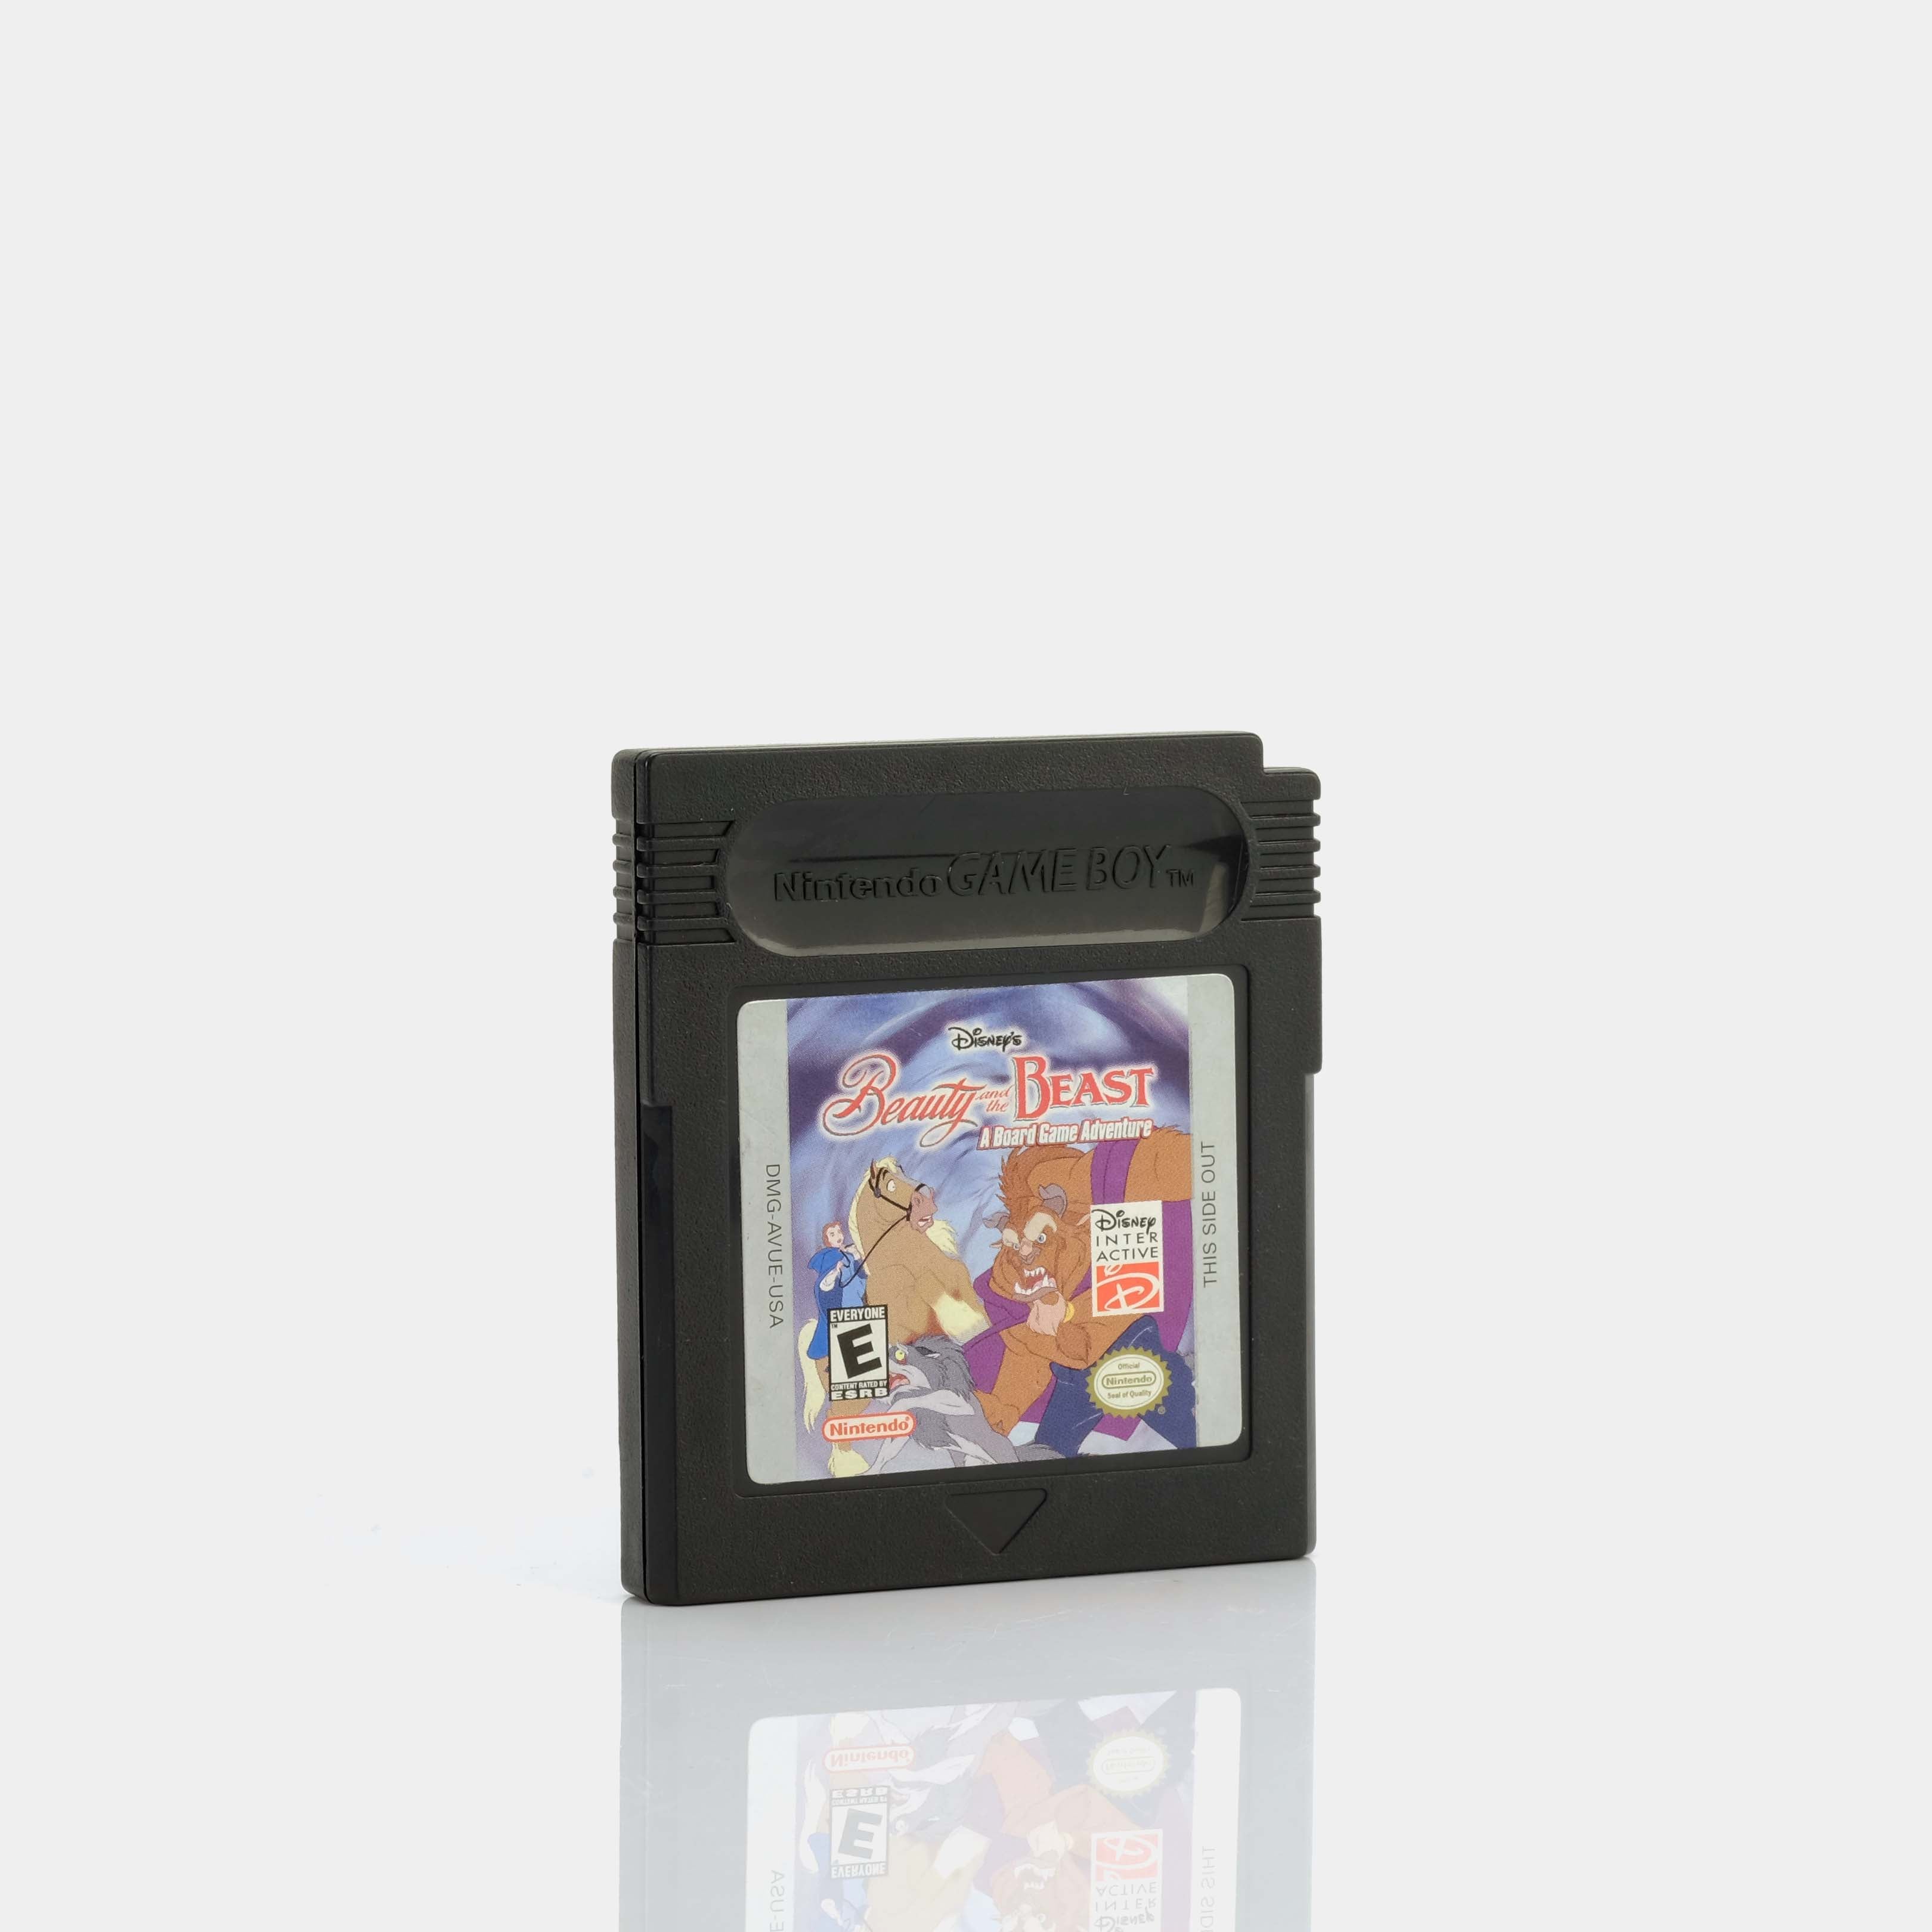 Disney's Beauty & The Beast: A Board Game Adventure (1999) Game Boy Game